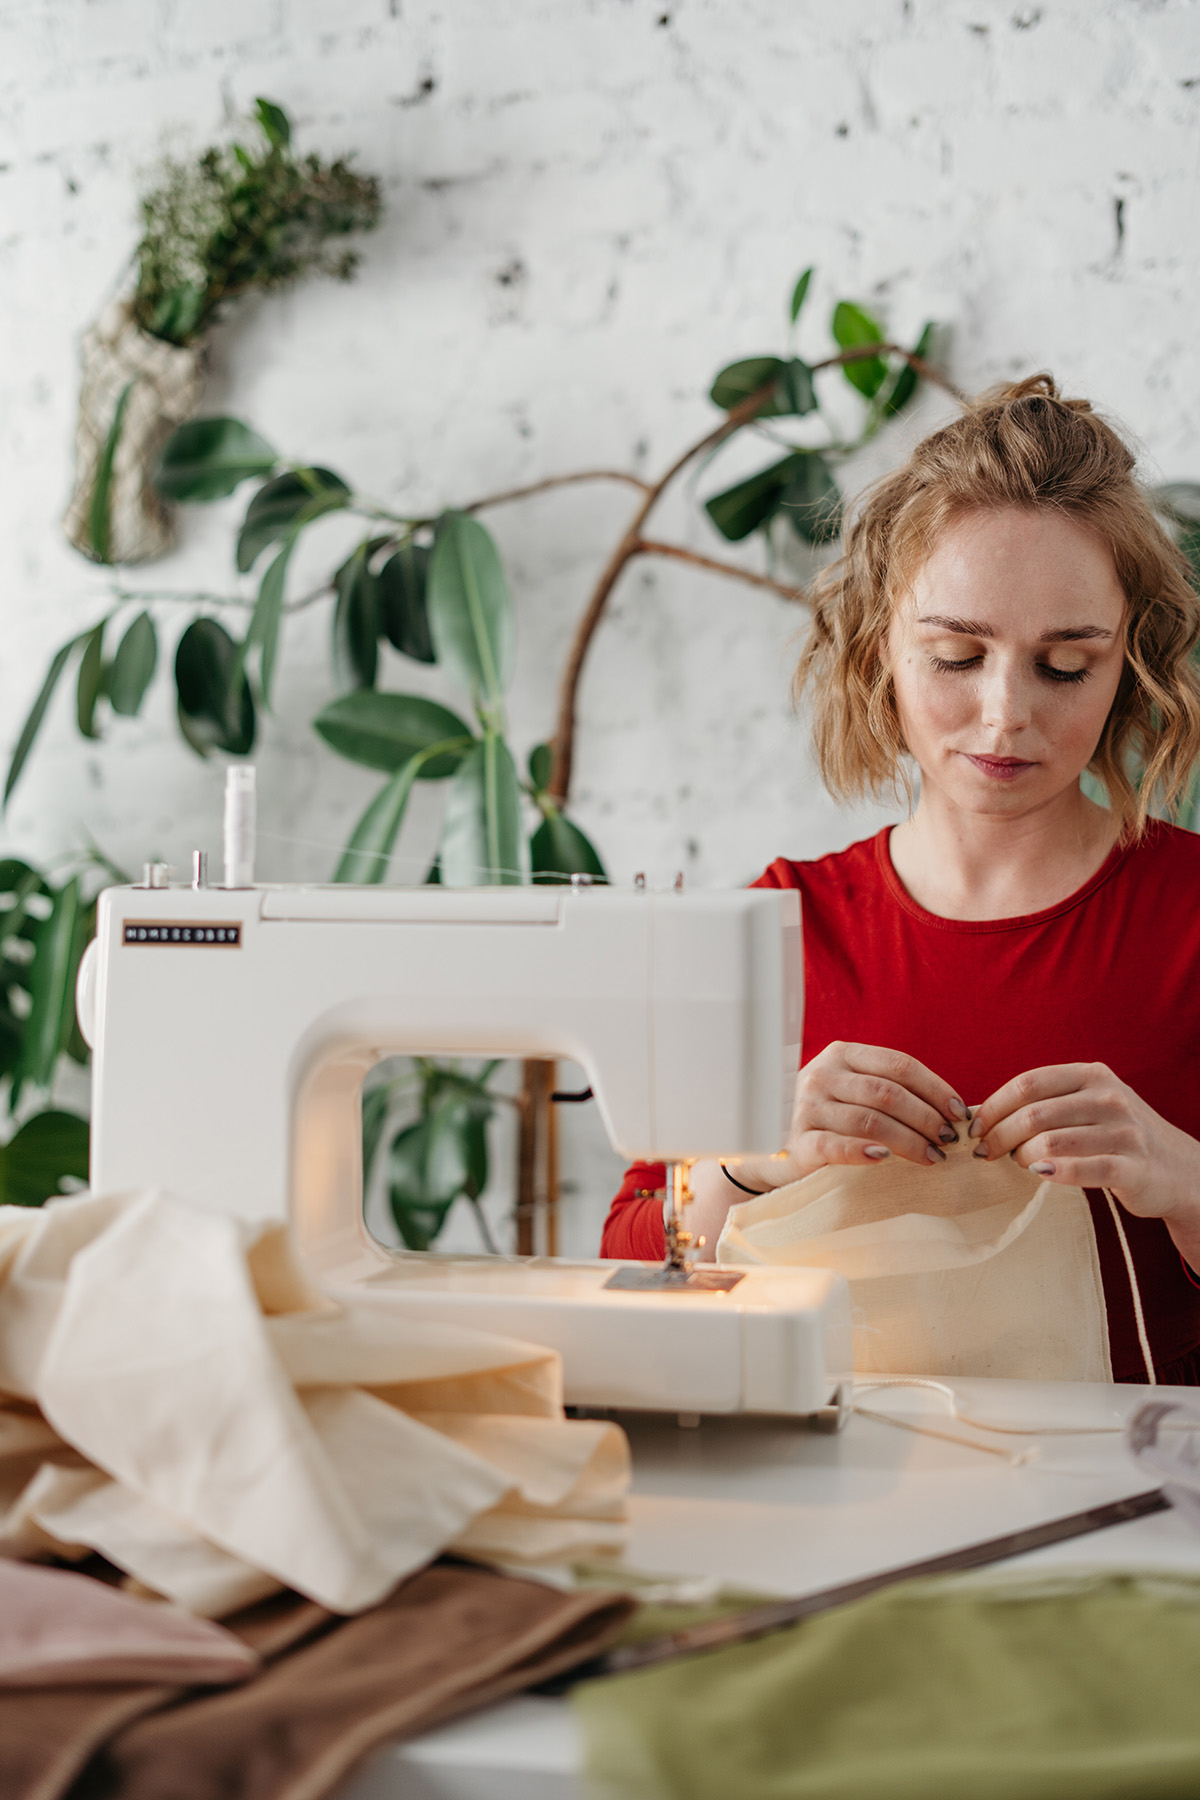 Ethical and sustainable fashion: What are they?